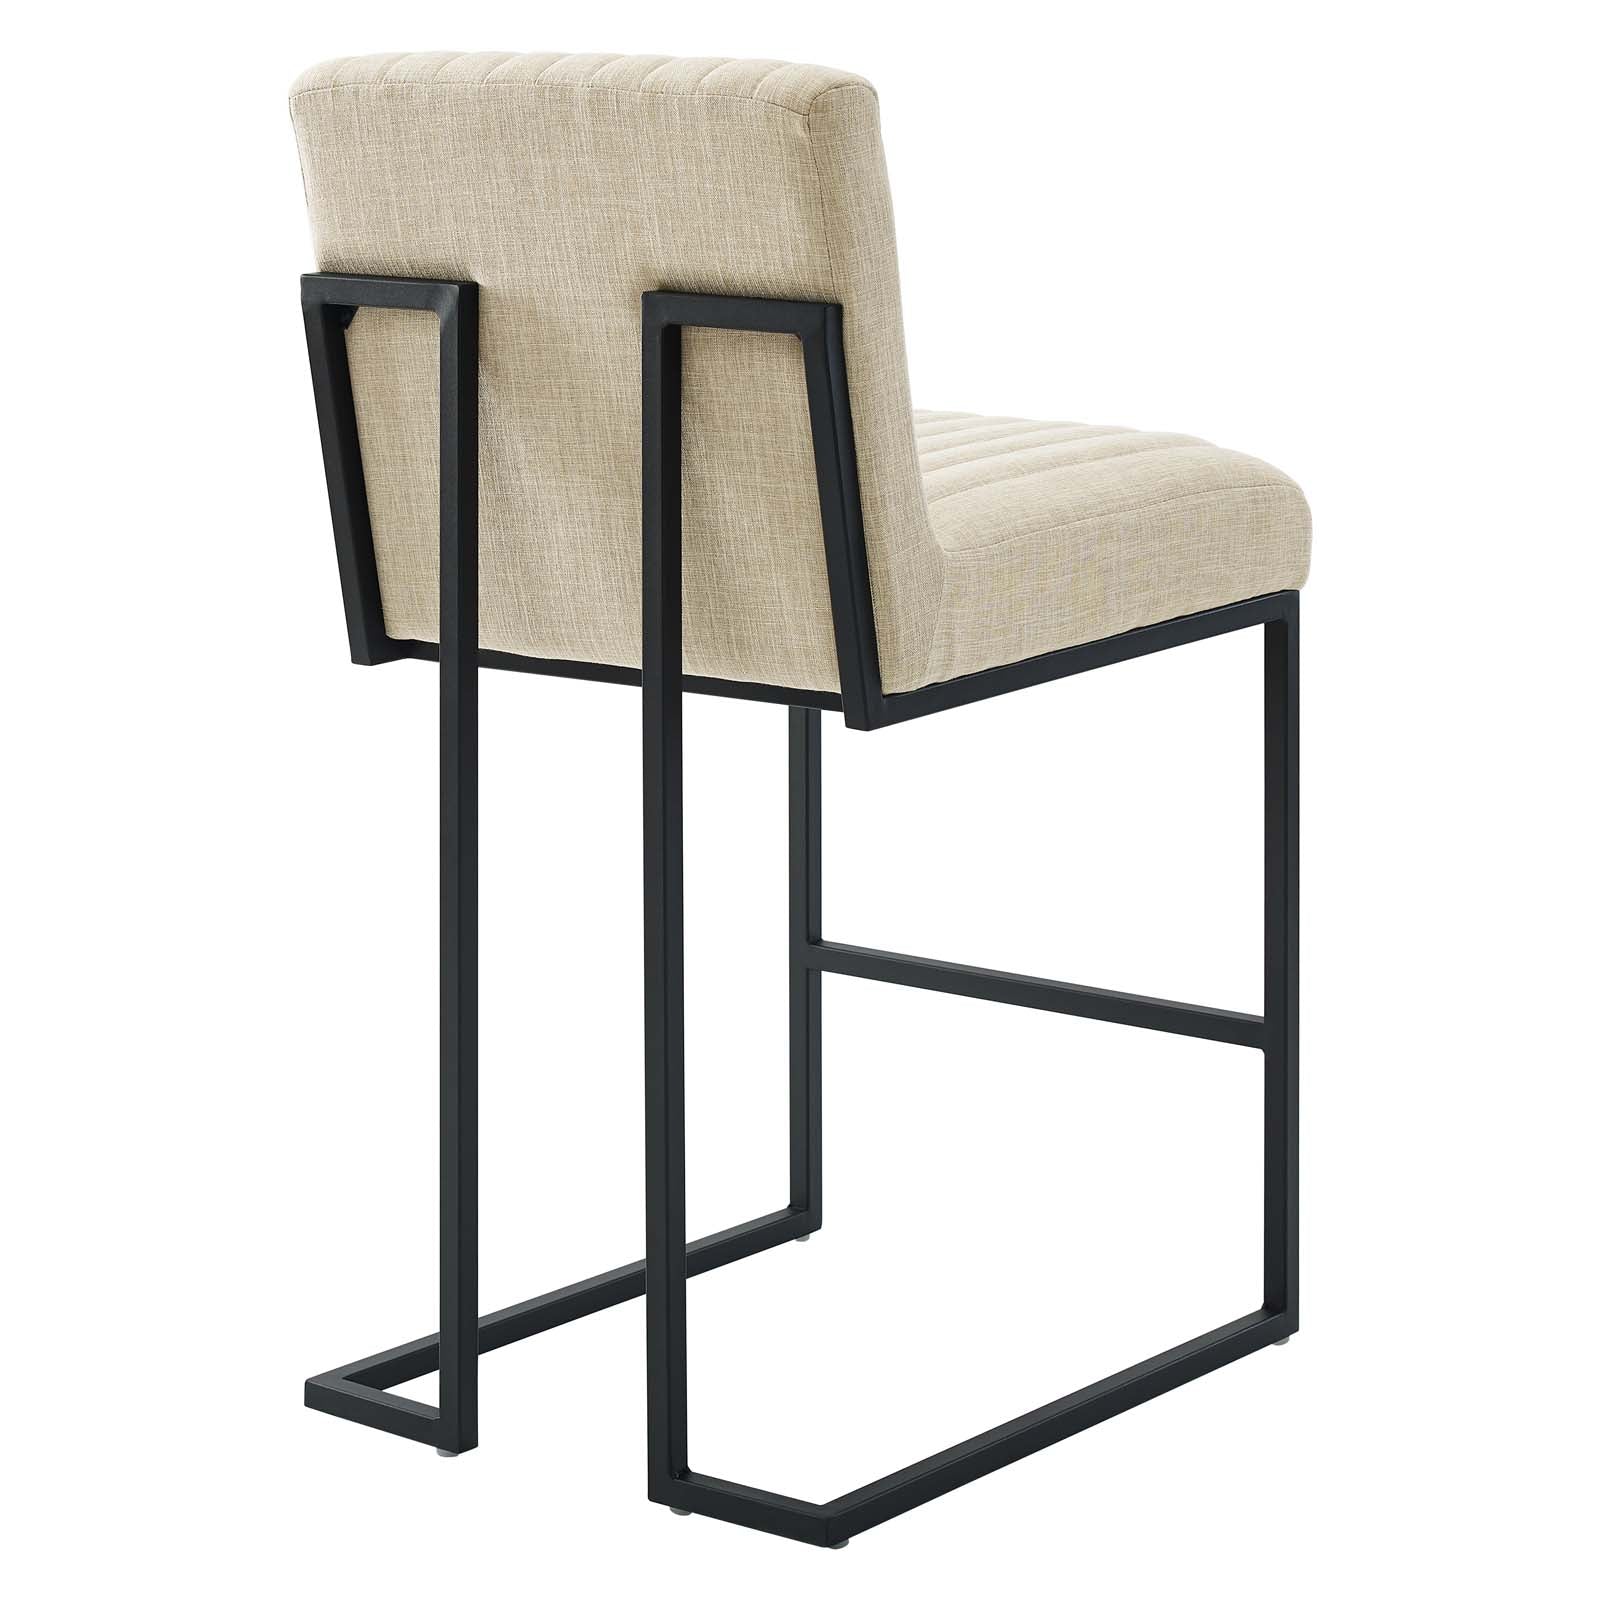 Modway Barstools - Indulge-Channel-Tufted-Fabric-Counter-Stool-Beige